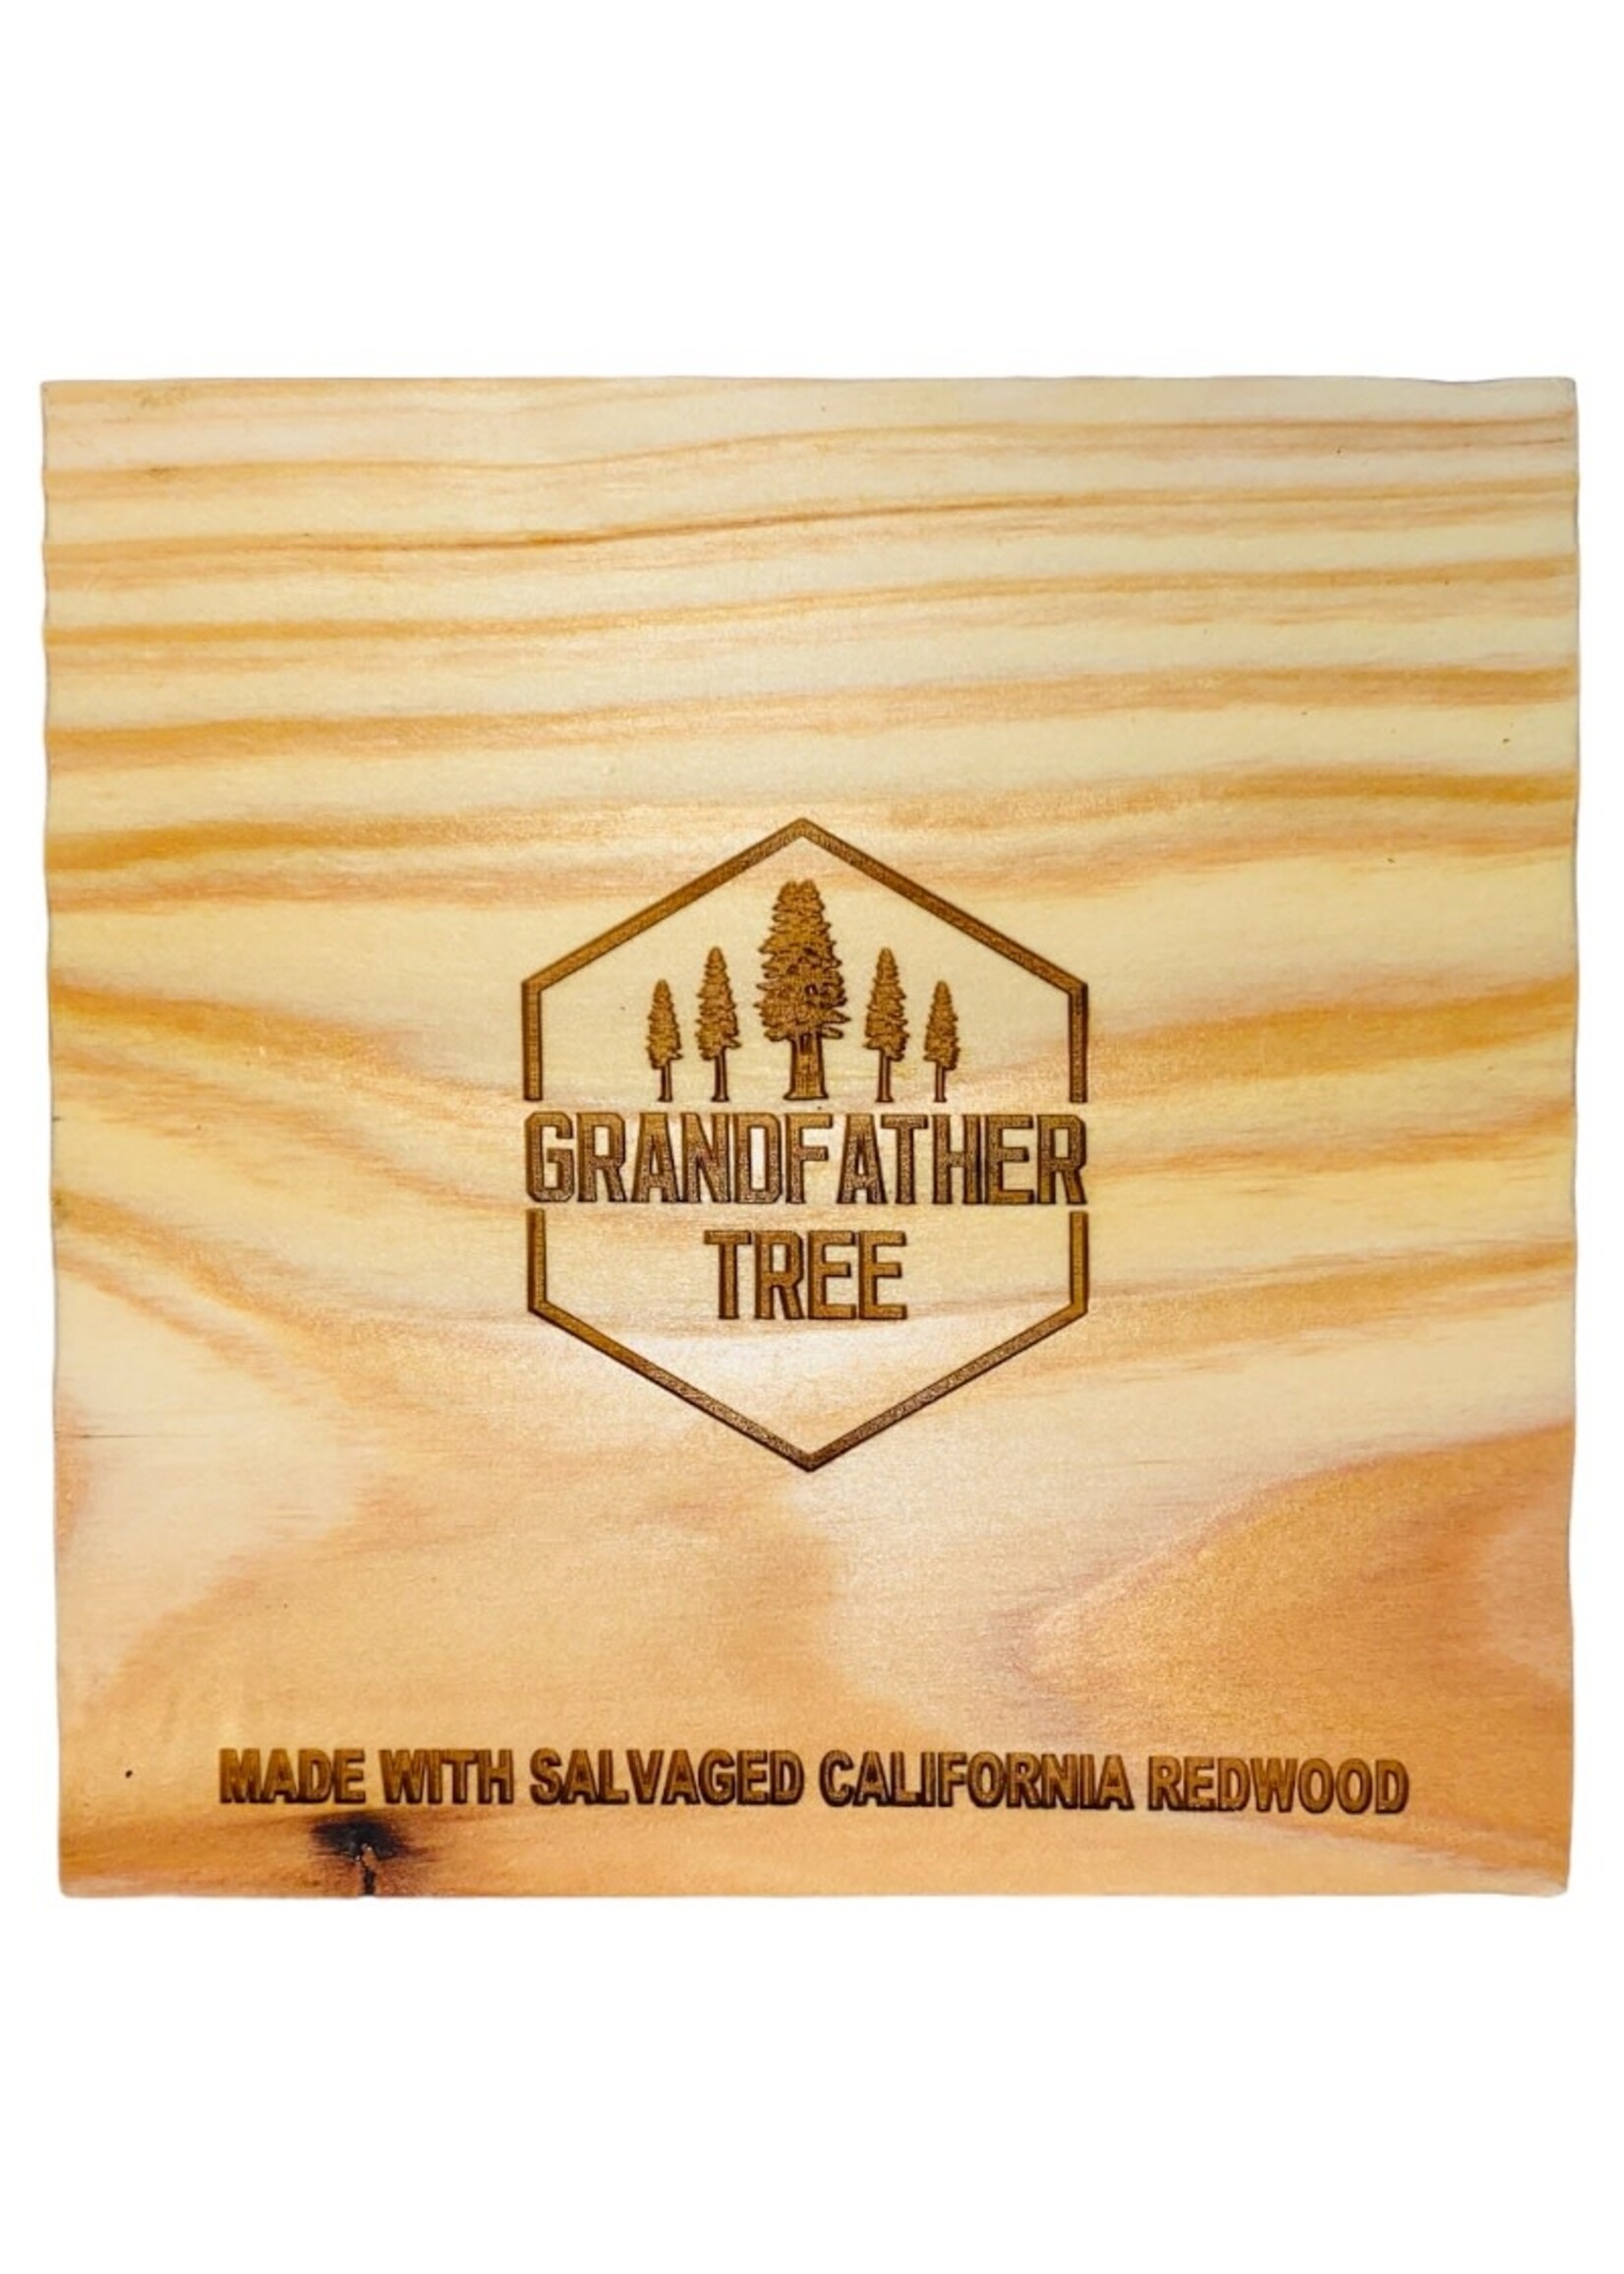 Redwood Shelf Sitter - The Air of New Places 5.5"